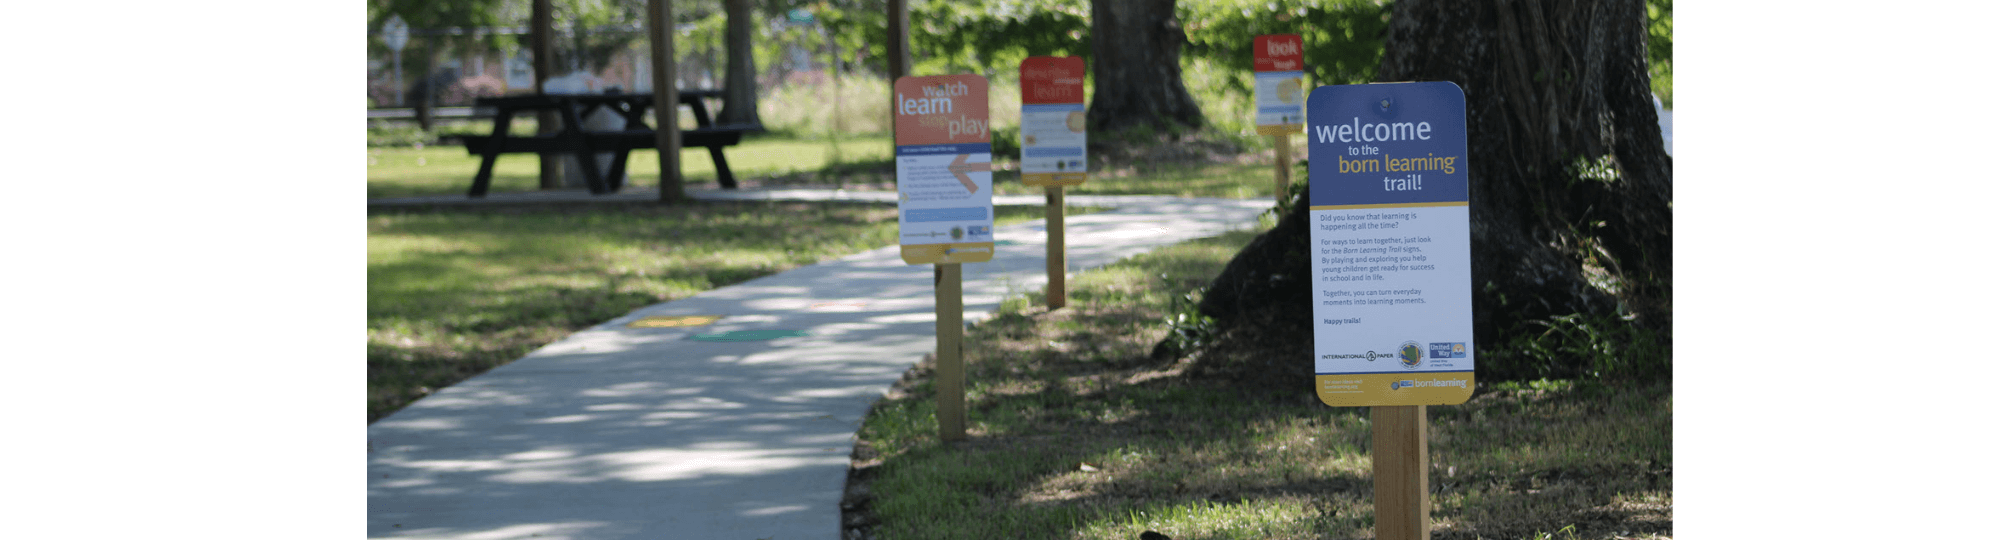 Picture of signs at Born Learning Trail